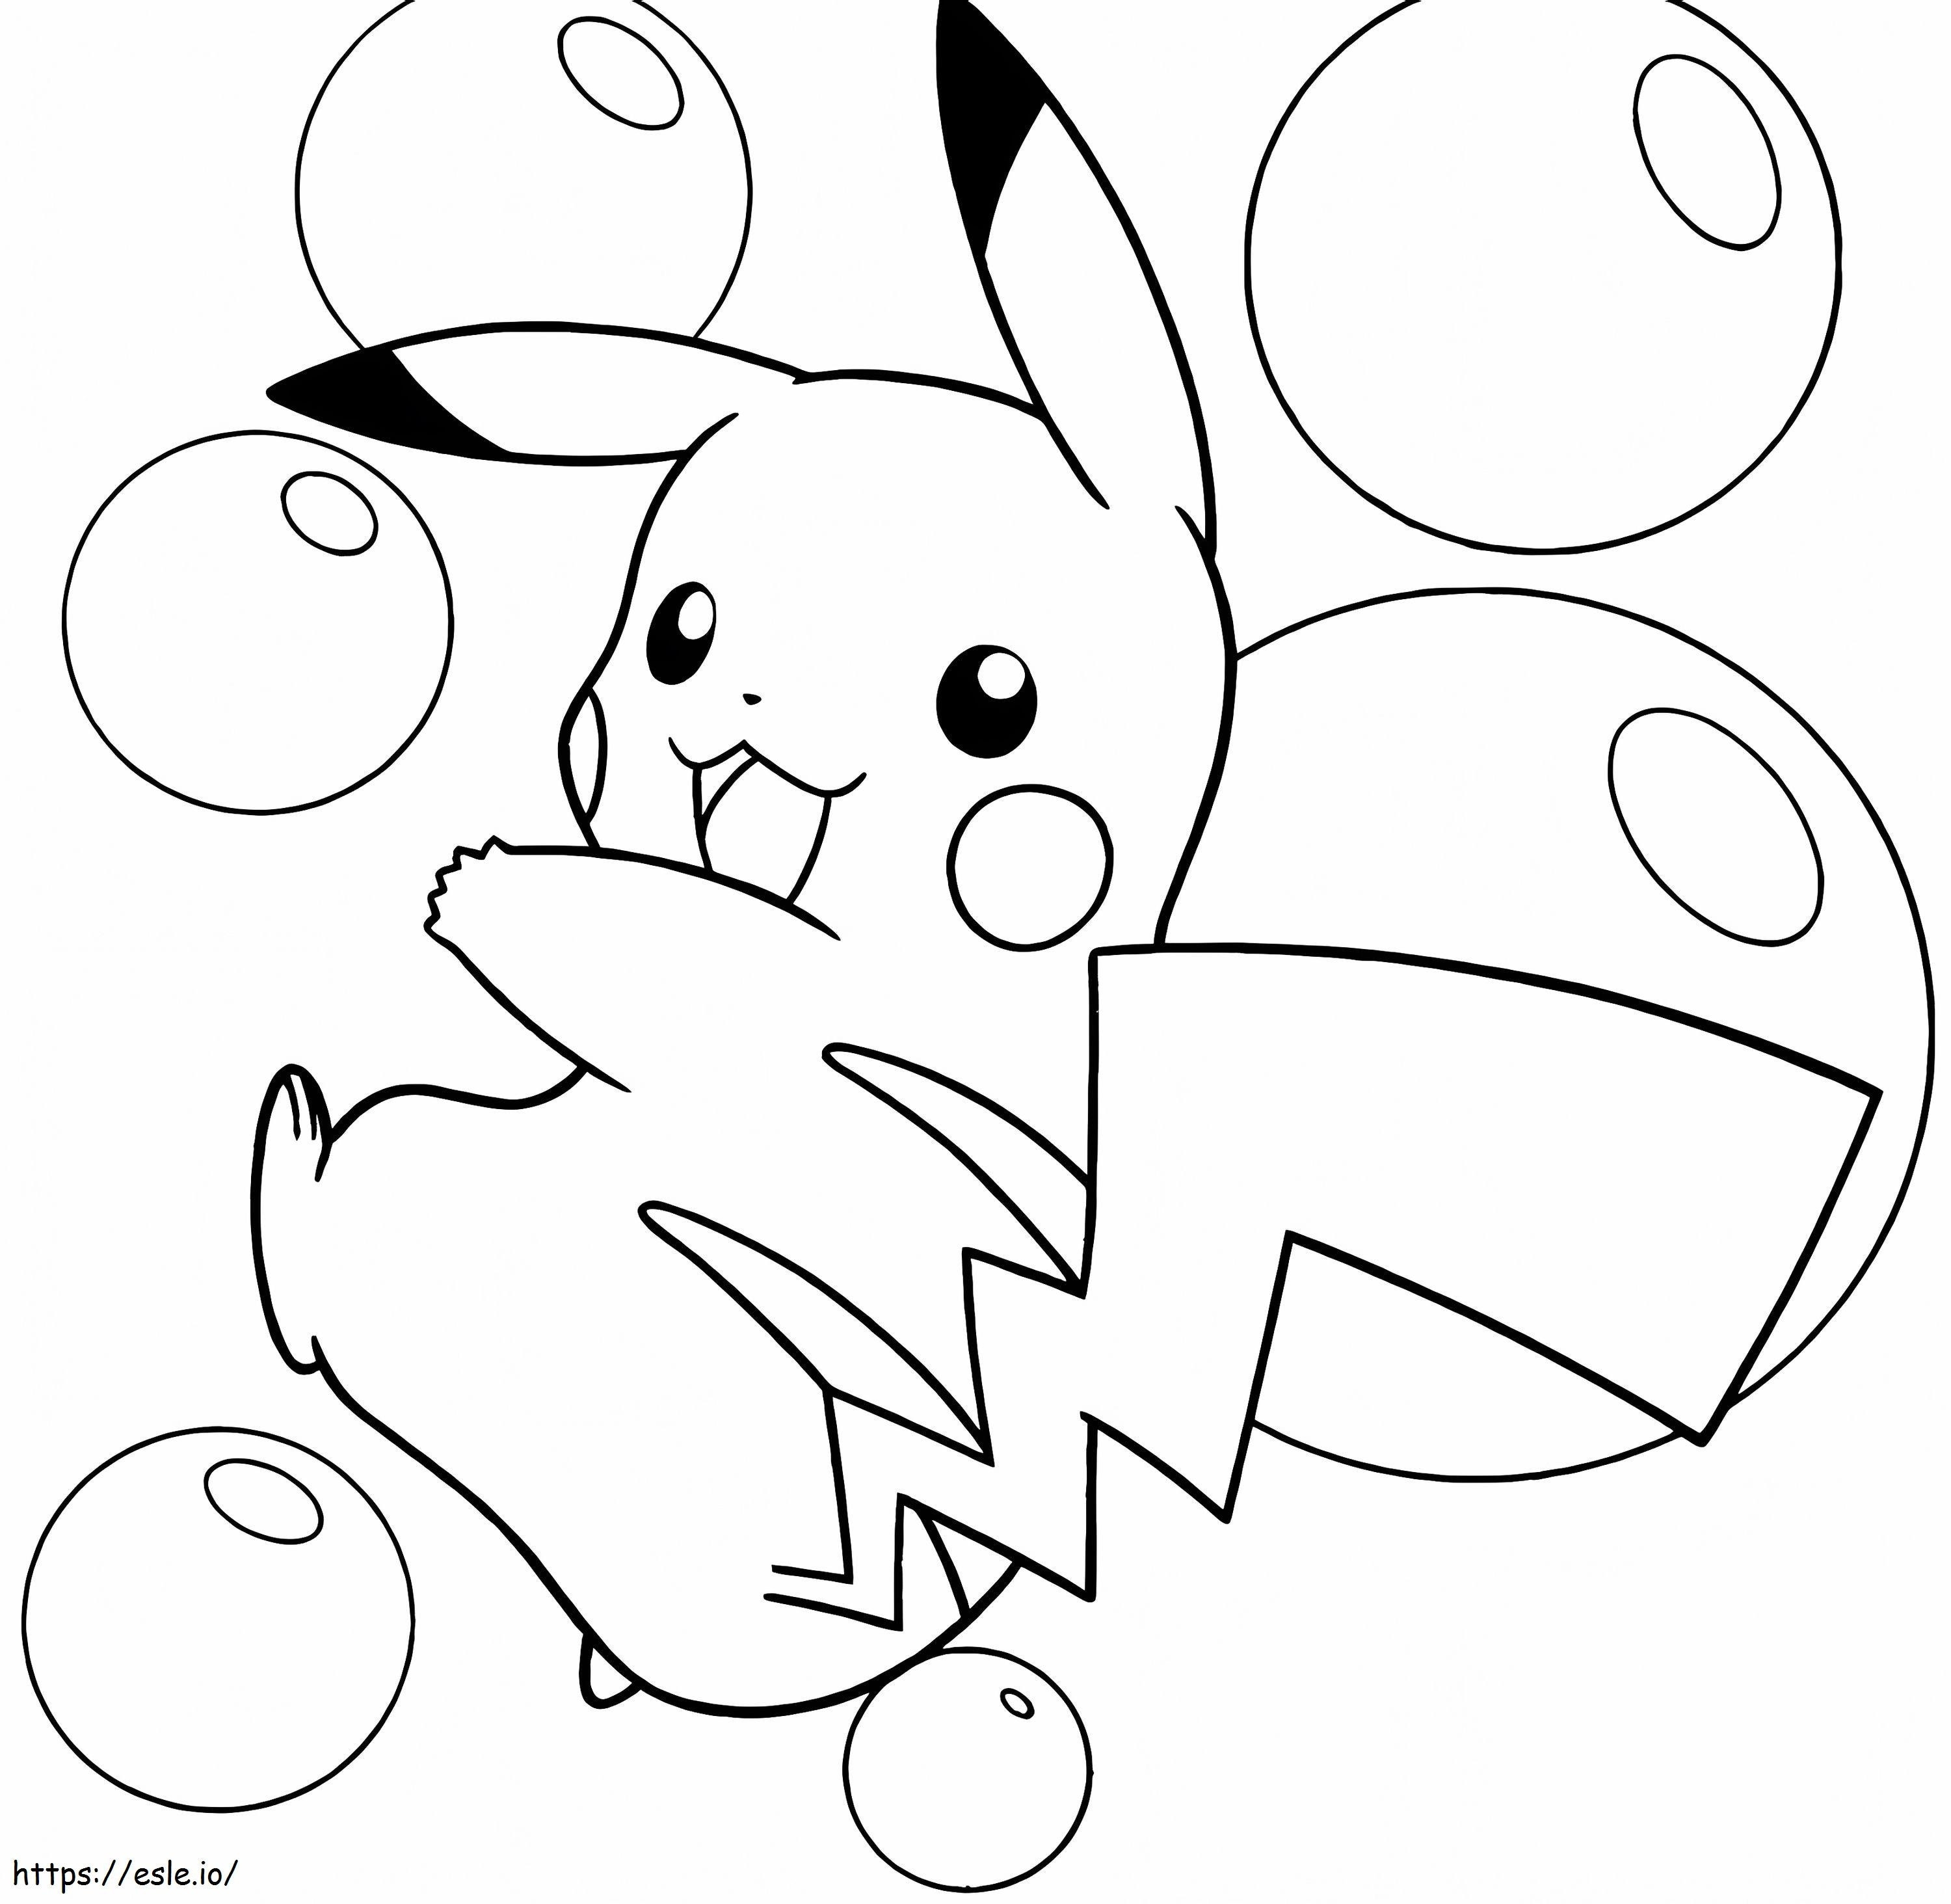 Pikachu And Bubbles coloring page